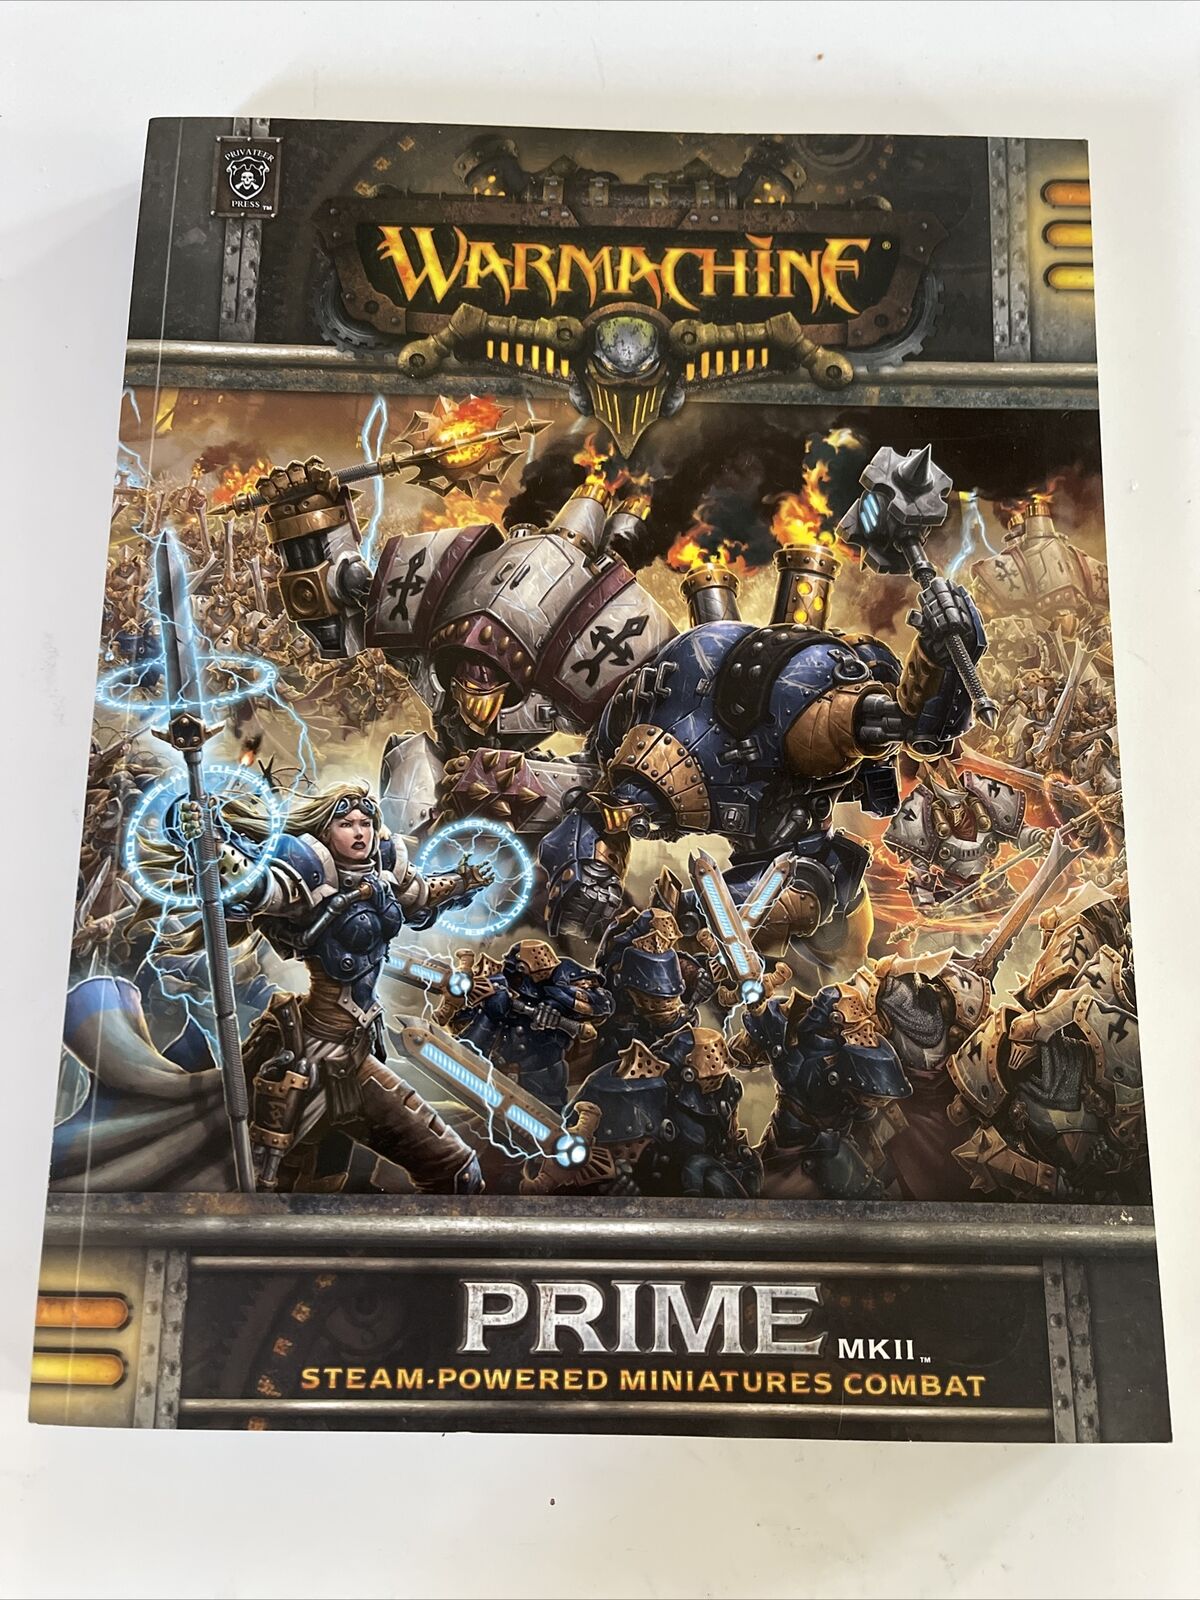 Warmachine Prime MKII Steam Powered Miniatures Combat Book First Edition